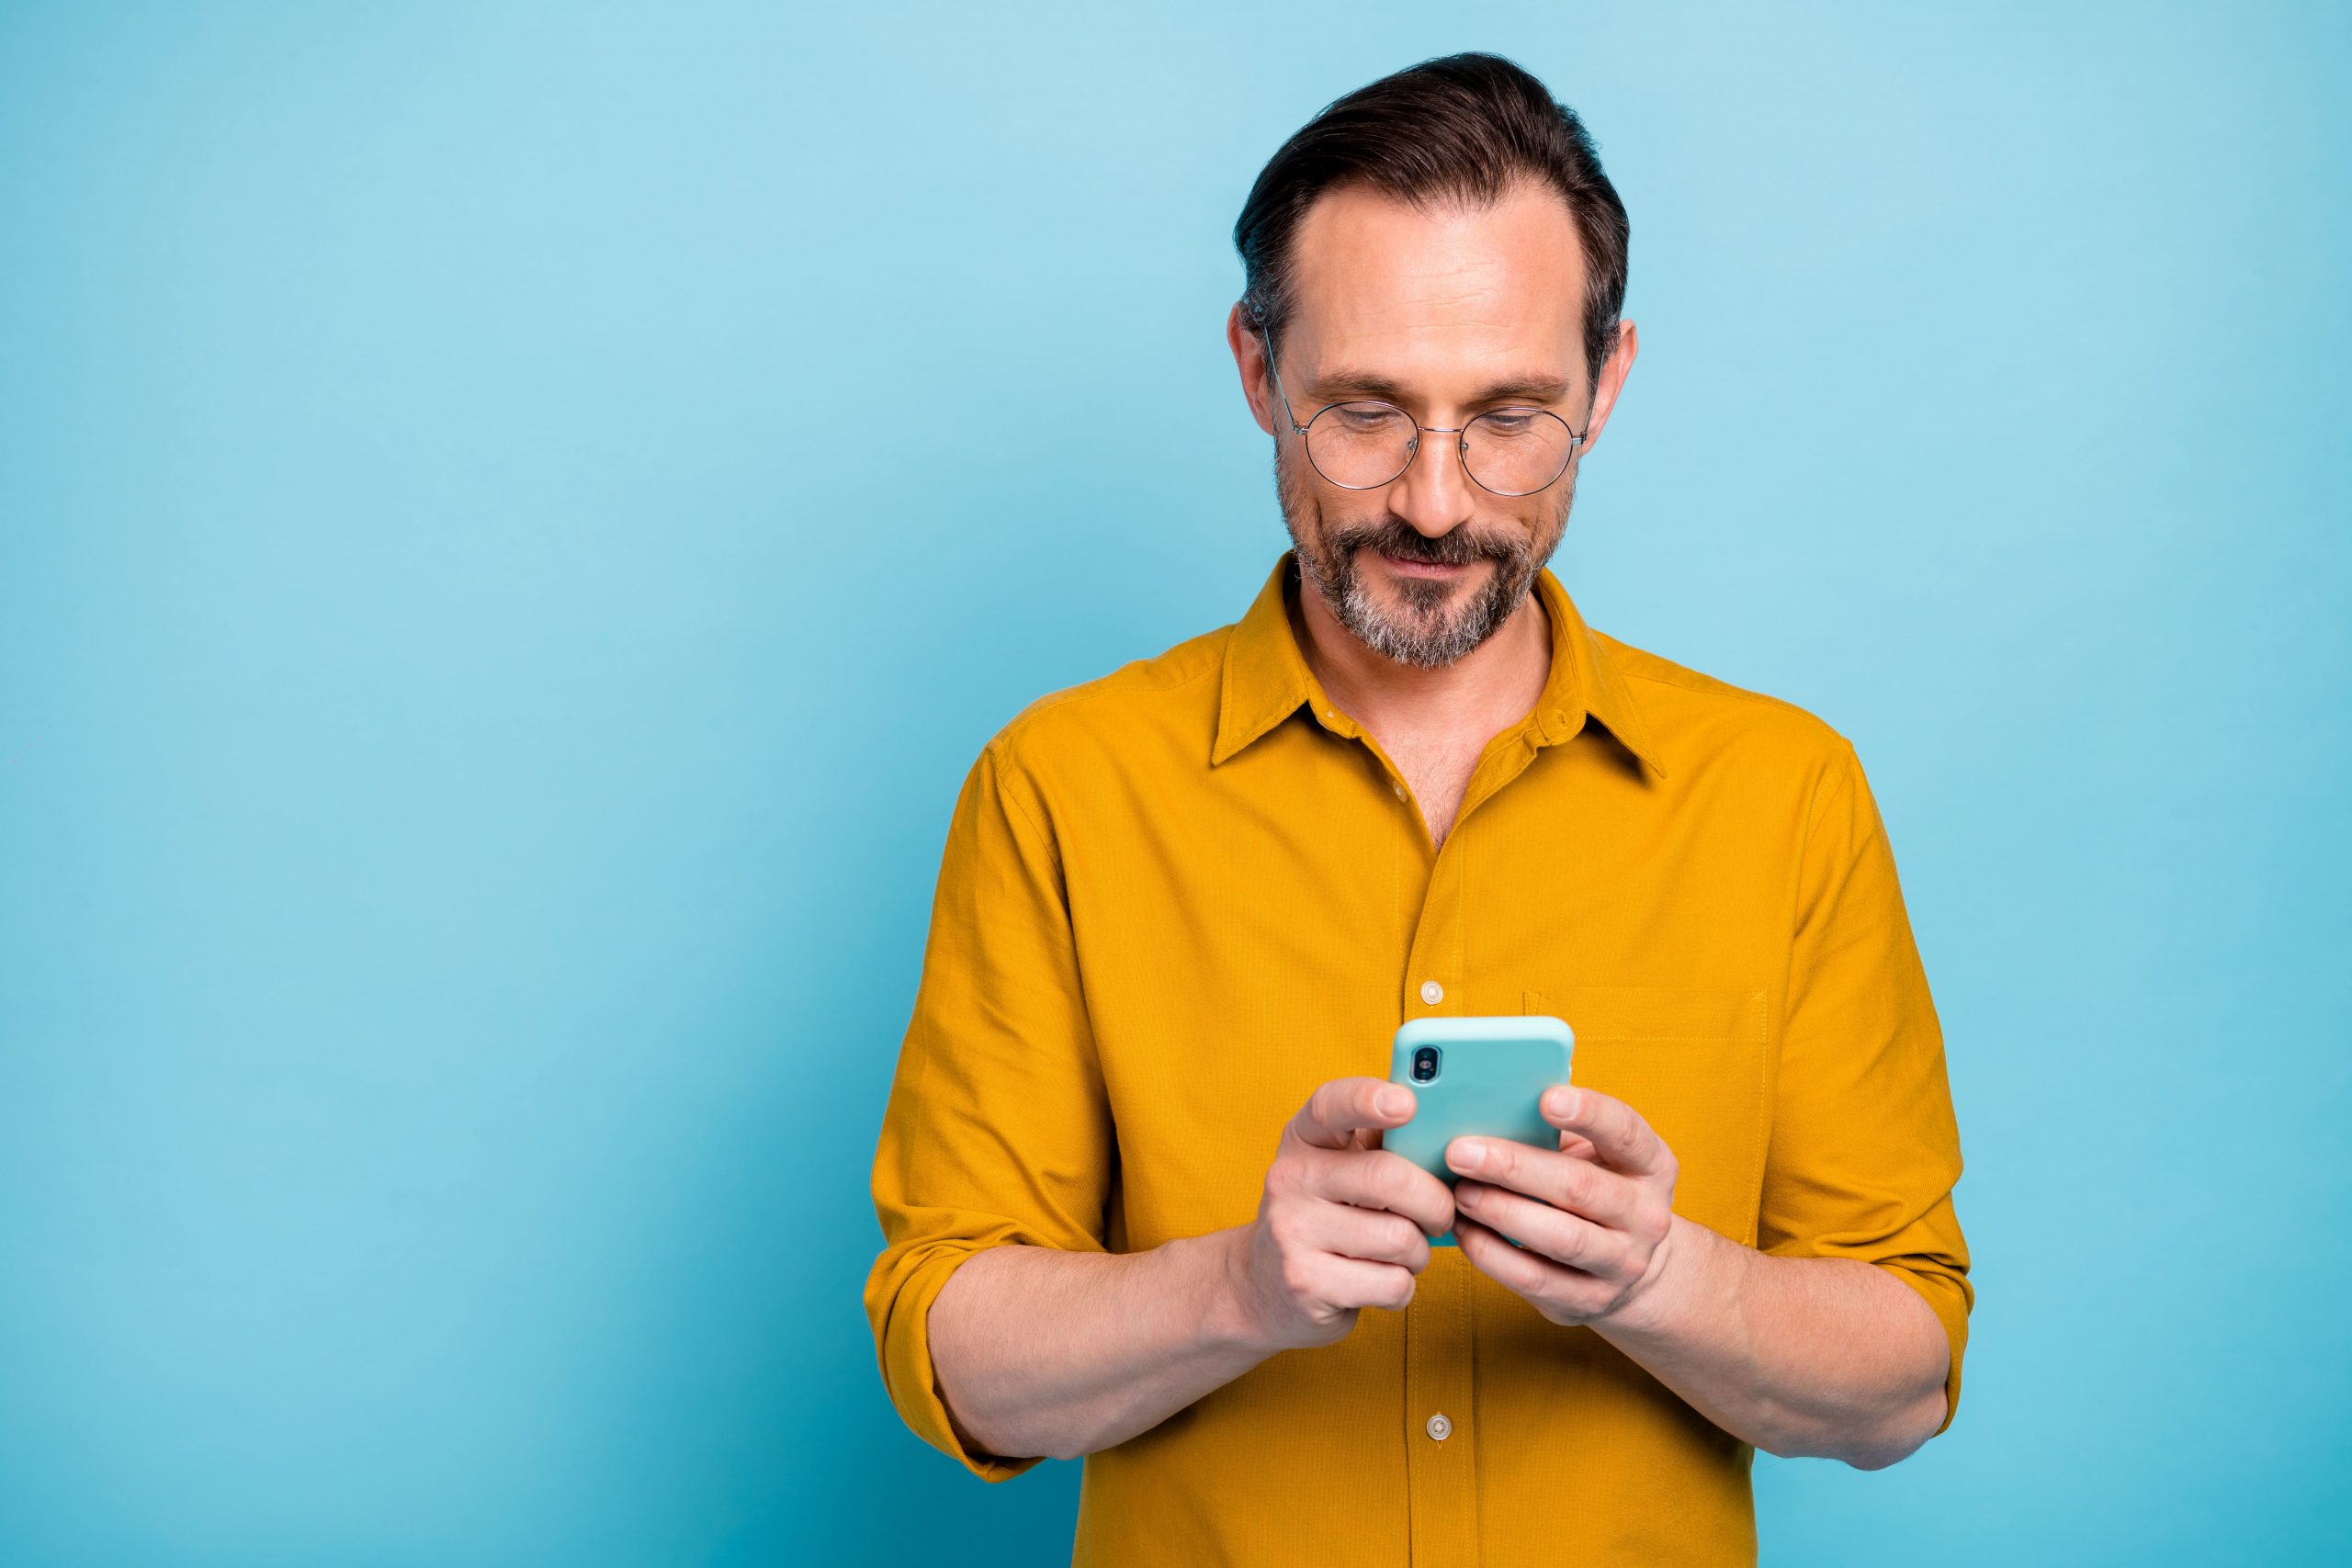 man with beard taking online quiz on iphone next to light blue background